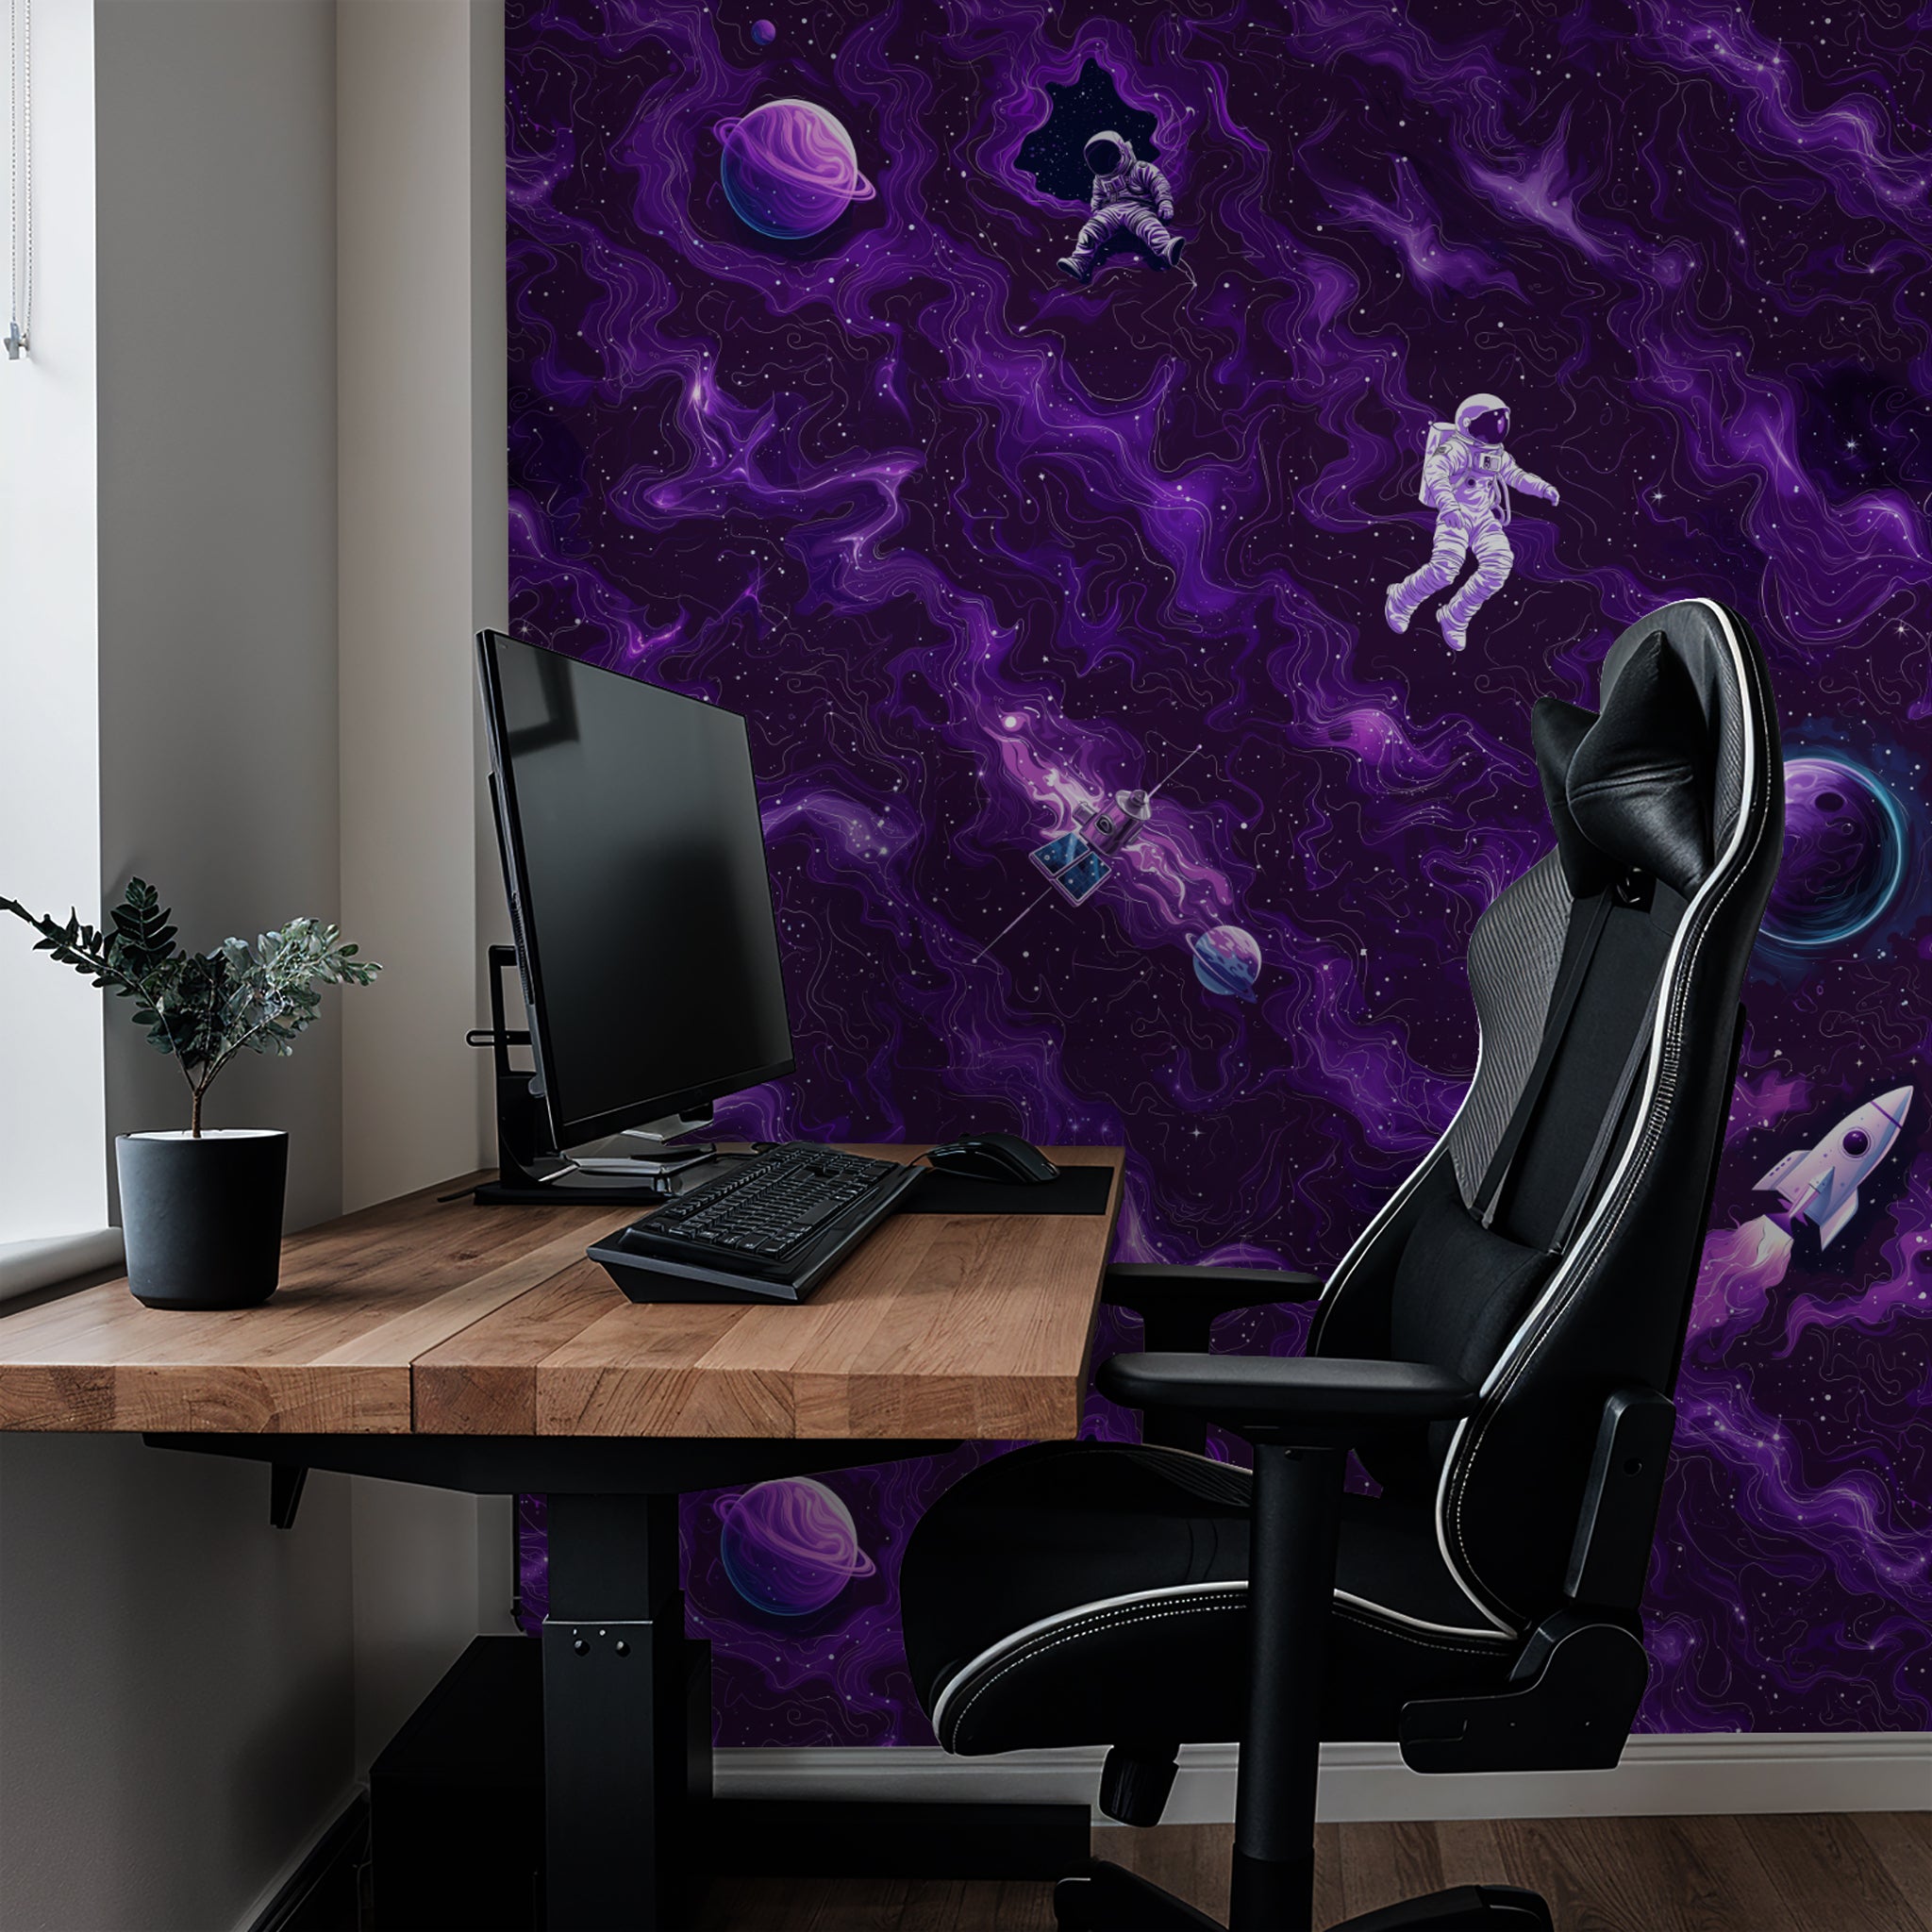 "Wall Blush Cosmic Voyage Wallpaper in a modern home office setup focusing on the vibrant space-themed design."